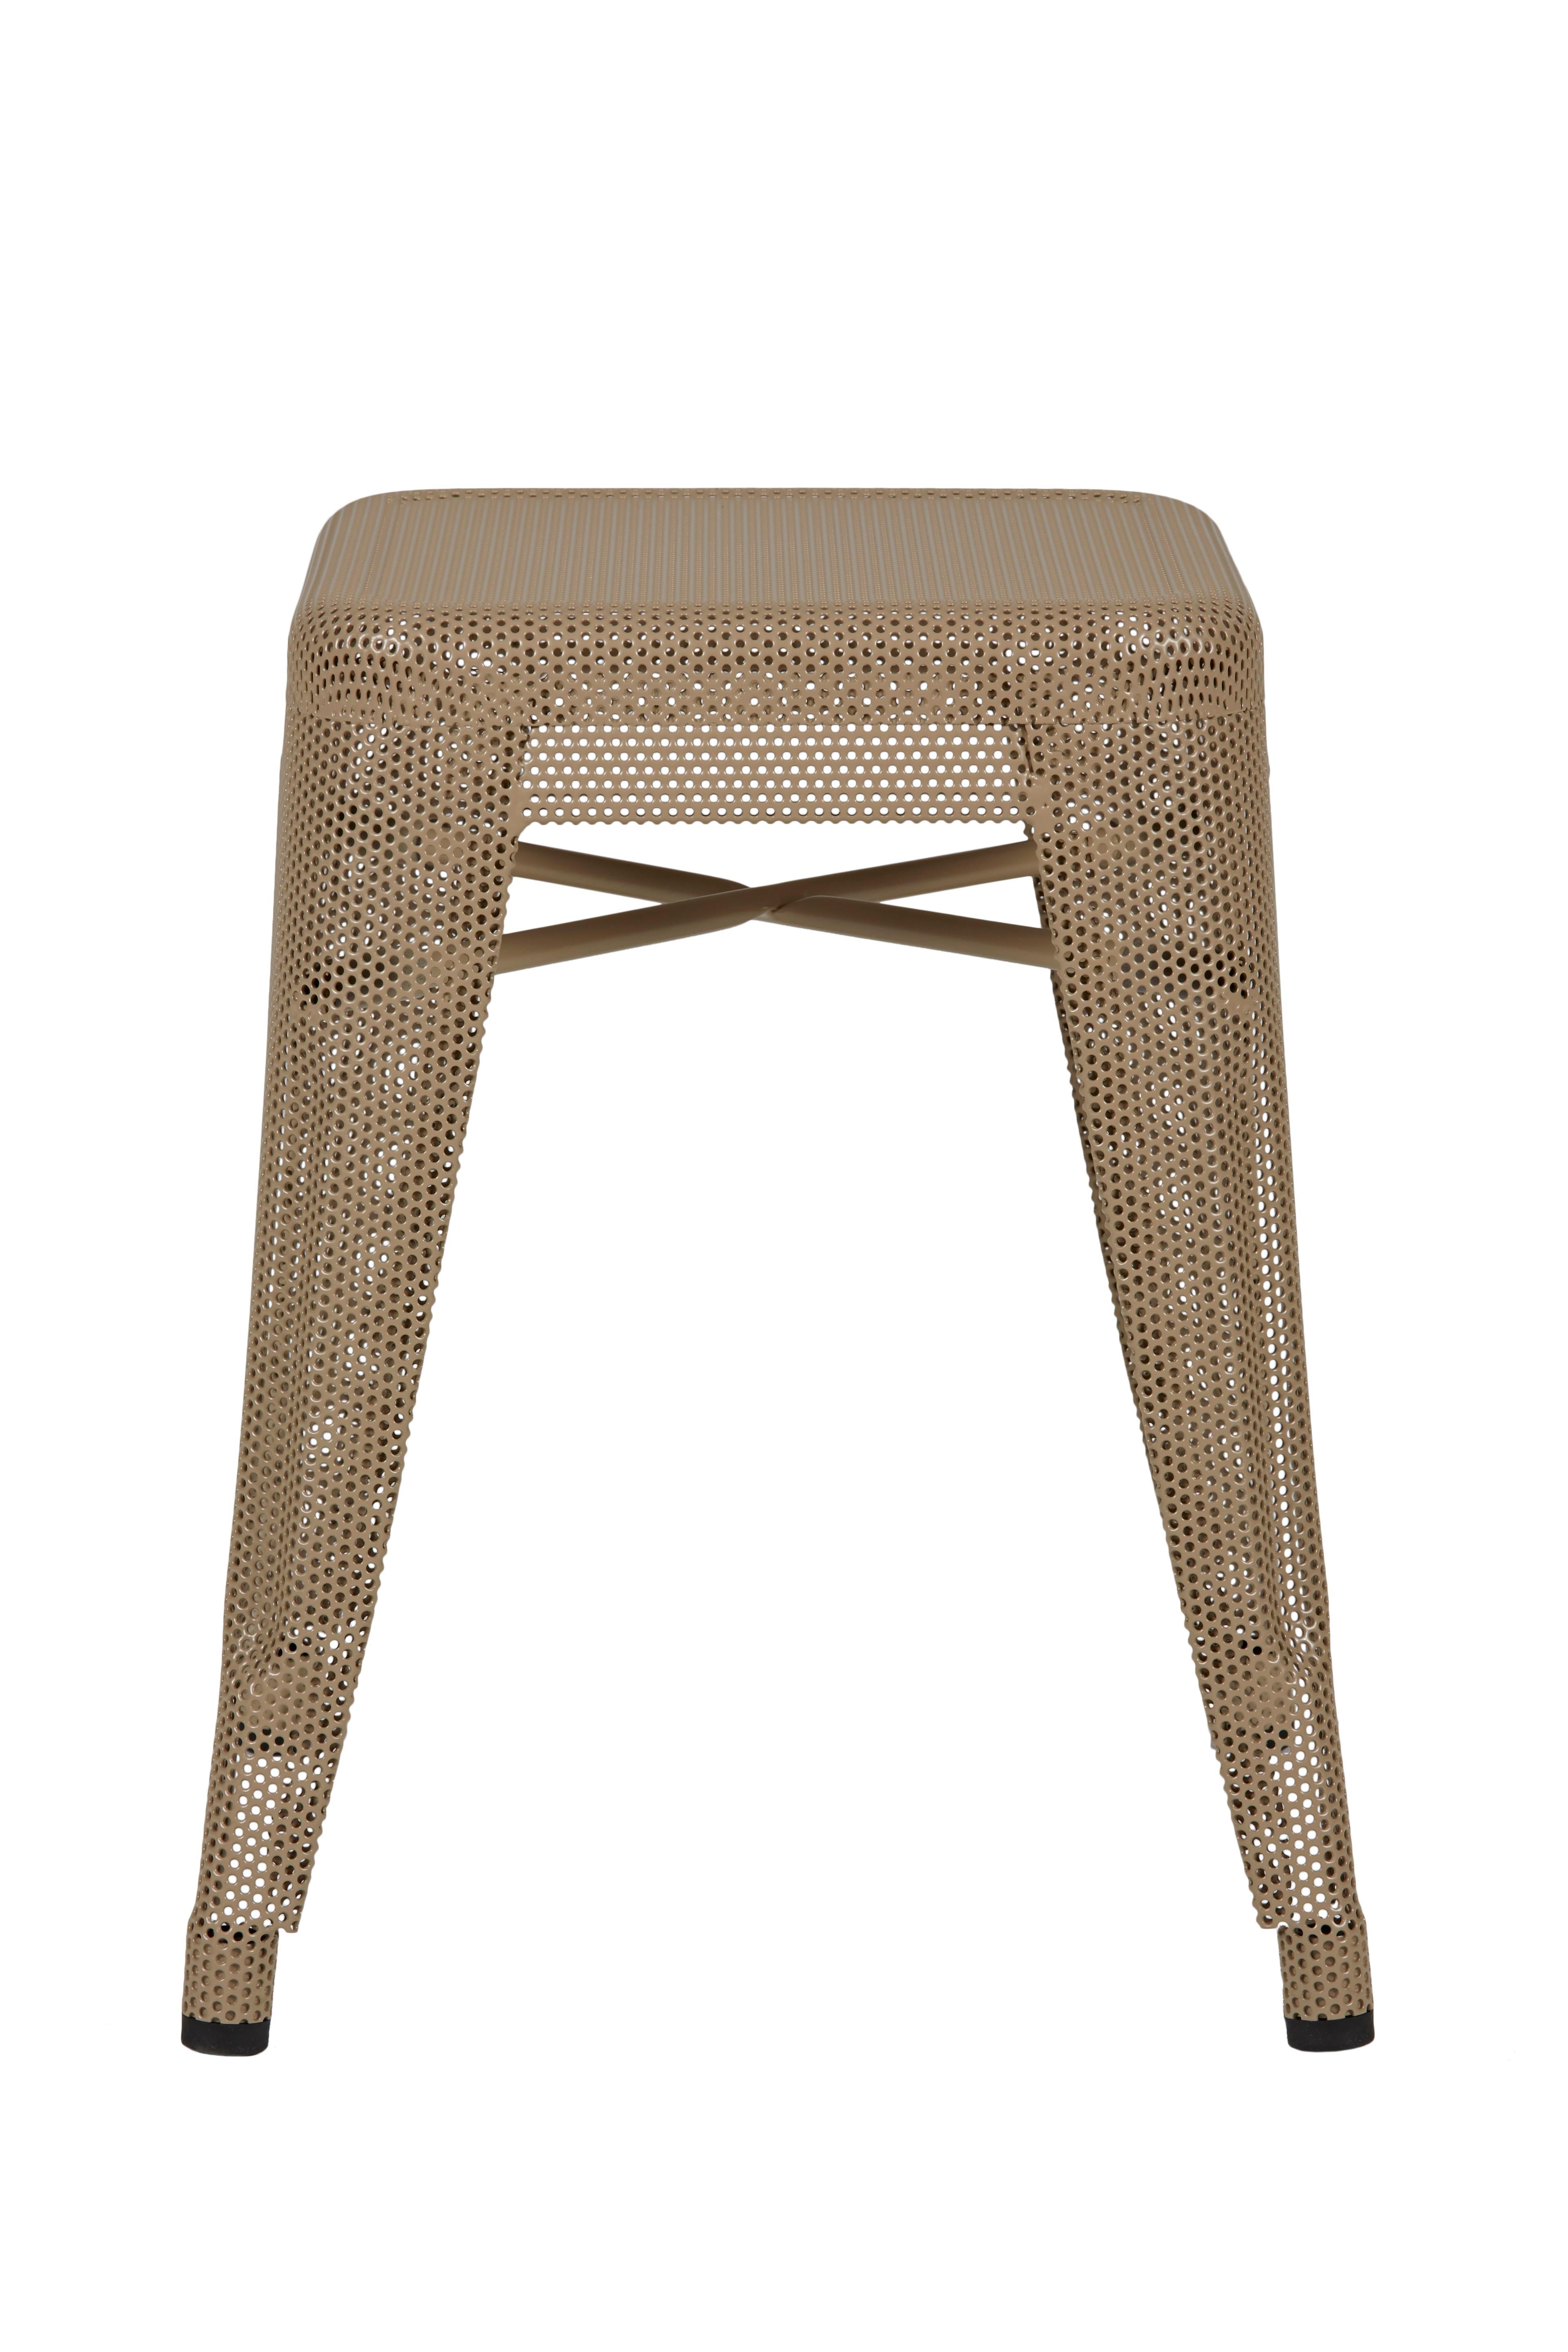 For Sale: Brown (Muscade) H Stool 45 Perforated in Essential Colors by Chantal Andriot and Tolix